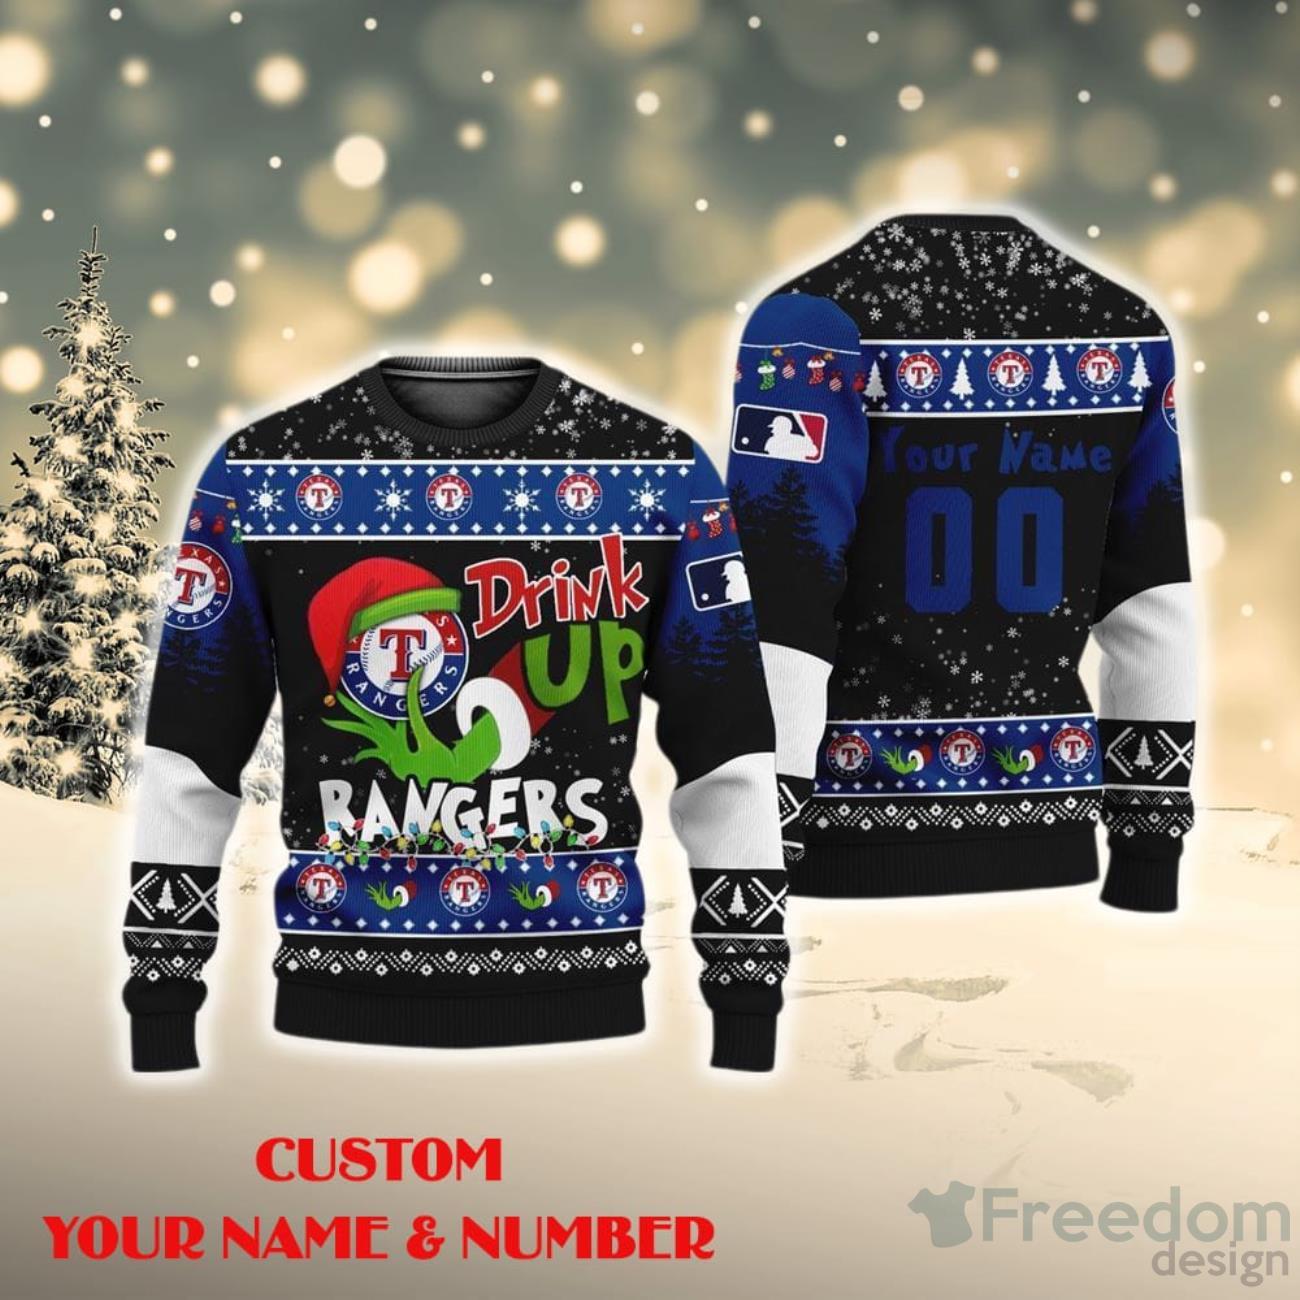 Texas Rangers Logo Knitted Pattern Ugly Christmas Sweater - Banantees